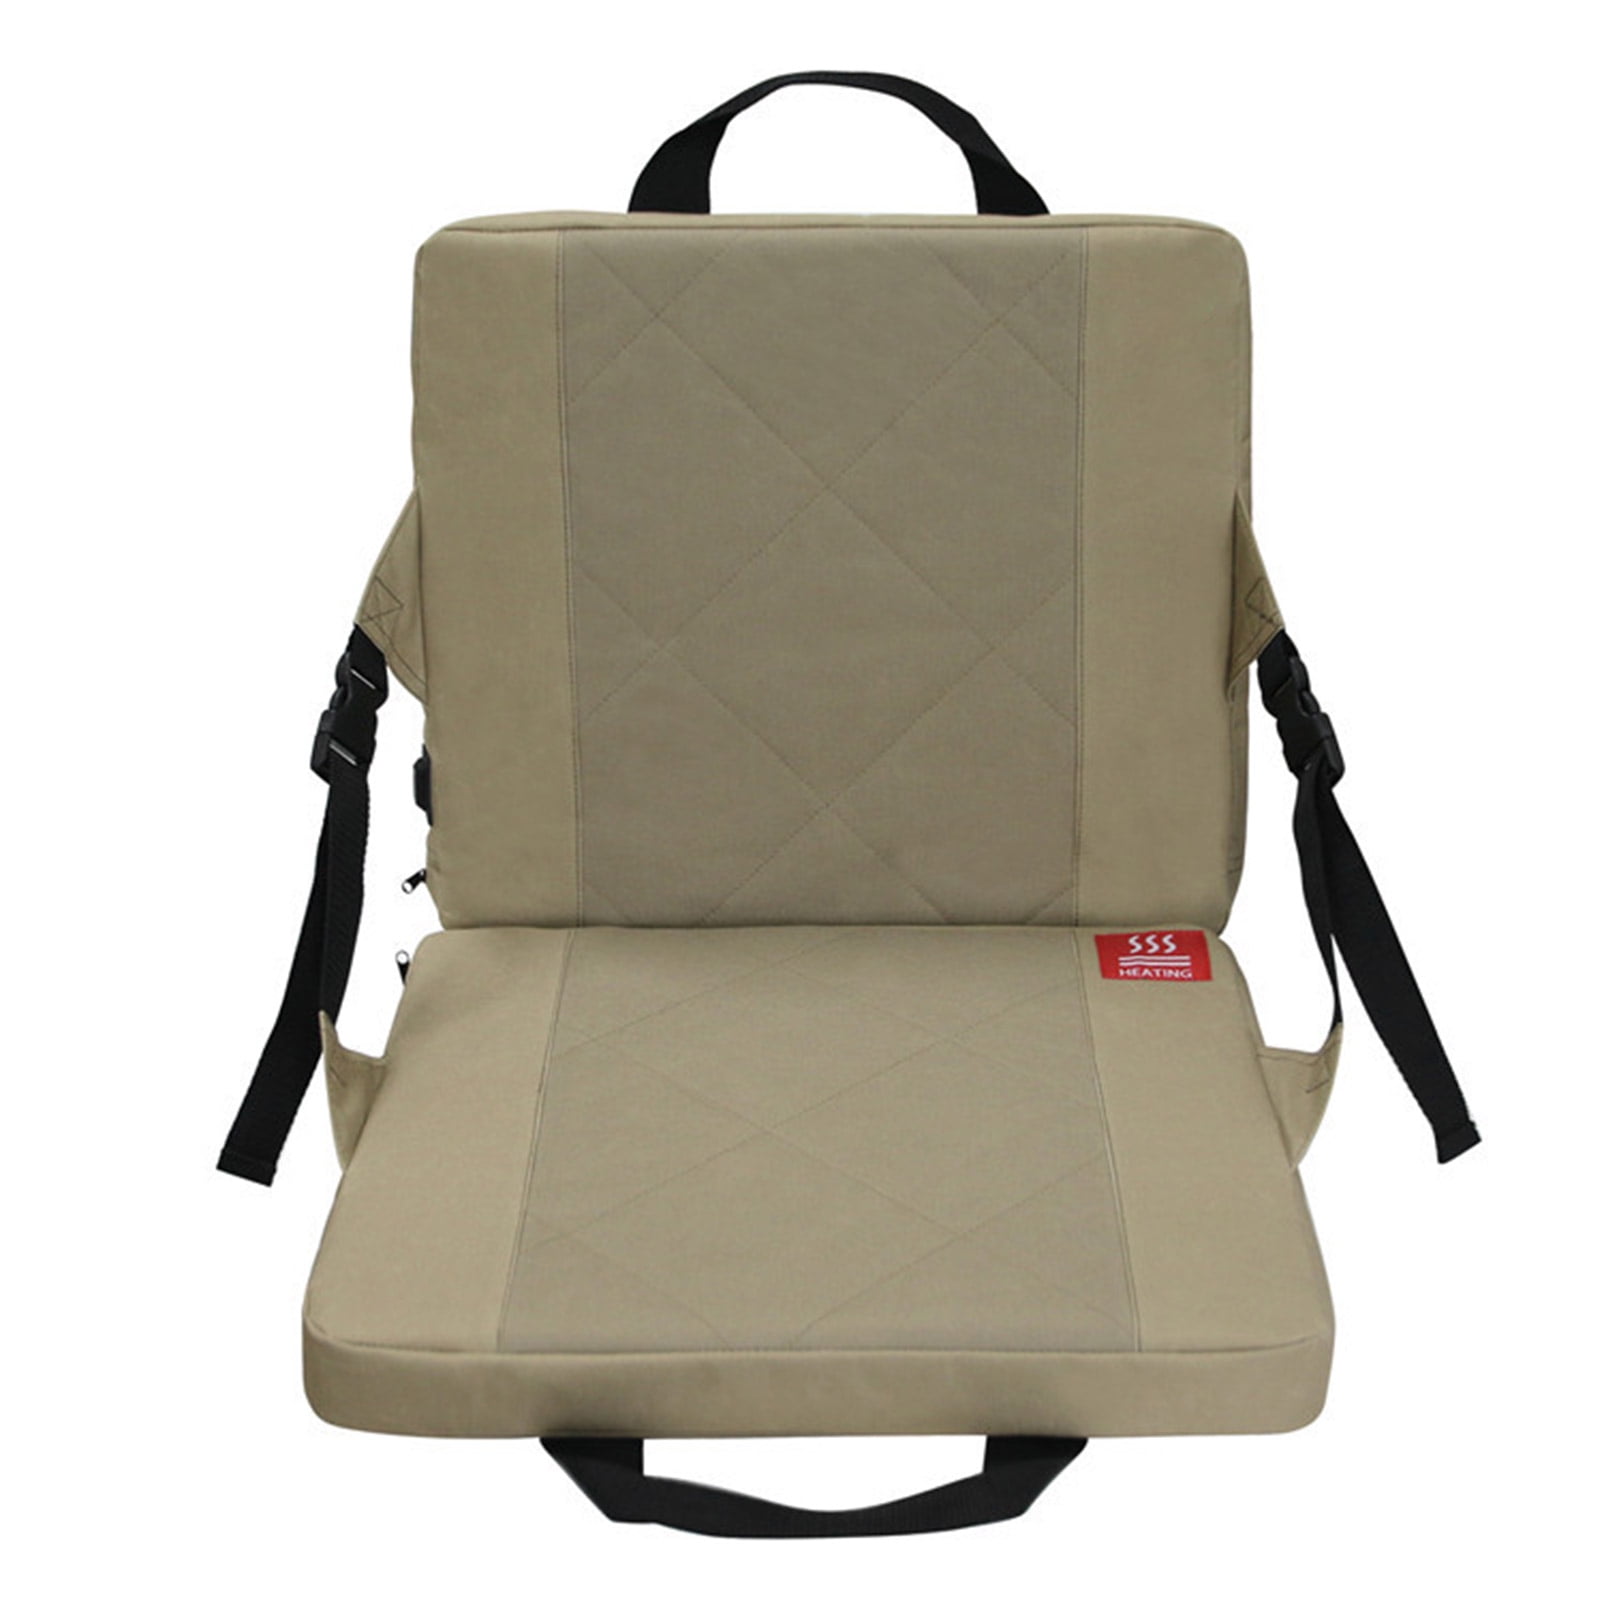 Auto Seat Wheelchair Seat Cushions for Pressure Square Chair Cushion  Polyester Nonslip Living Room Adult Bleacher Seat Cushion Heated Battery  Heated